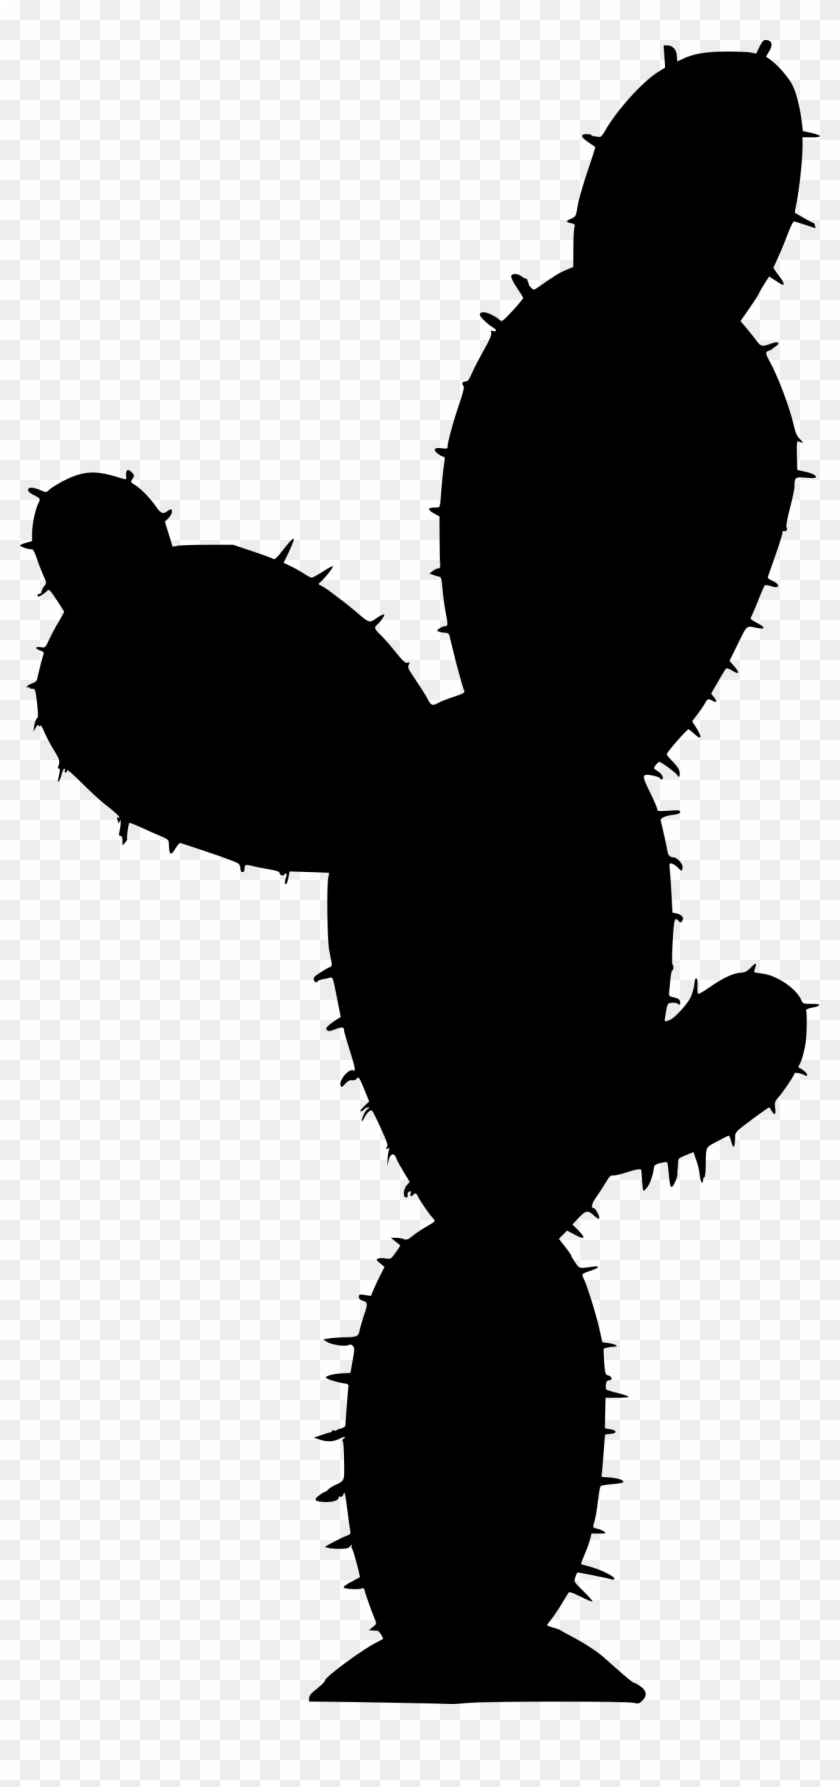 Cactus Silhouette PNG And Vector Images Free Download - Pngtree